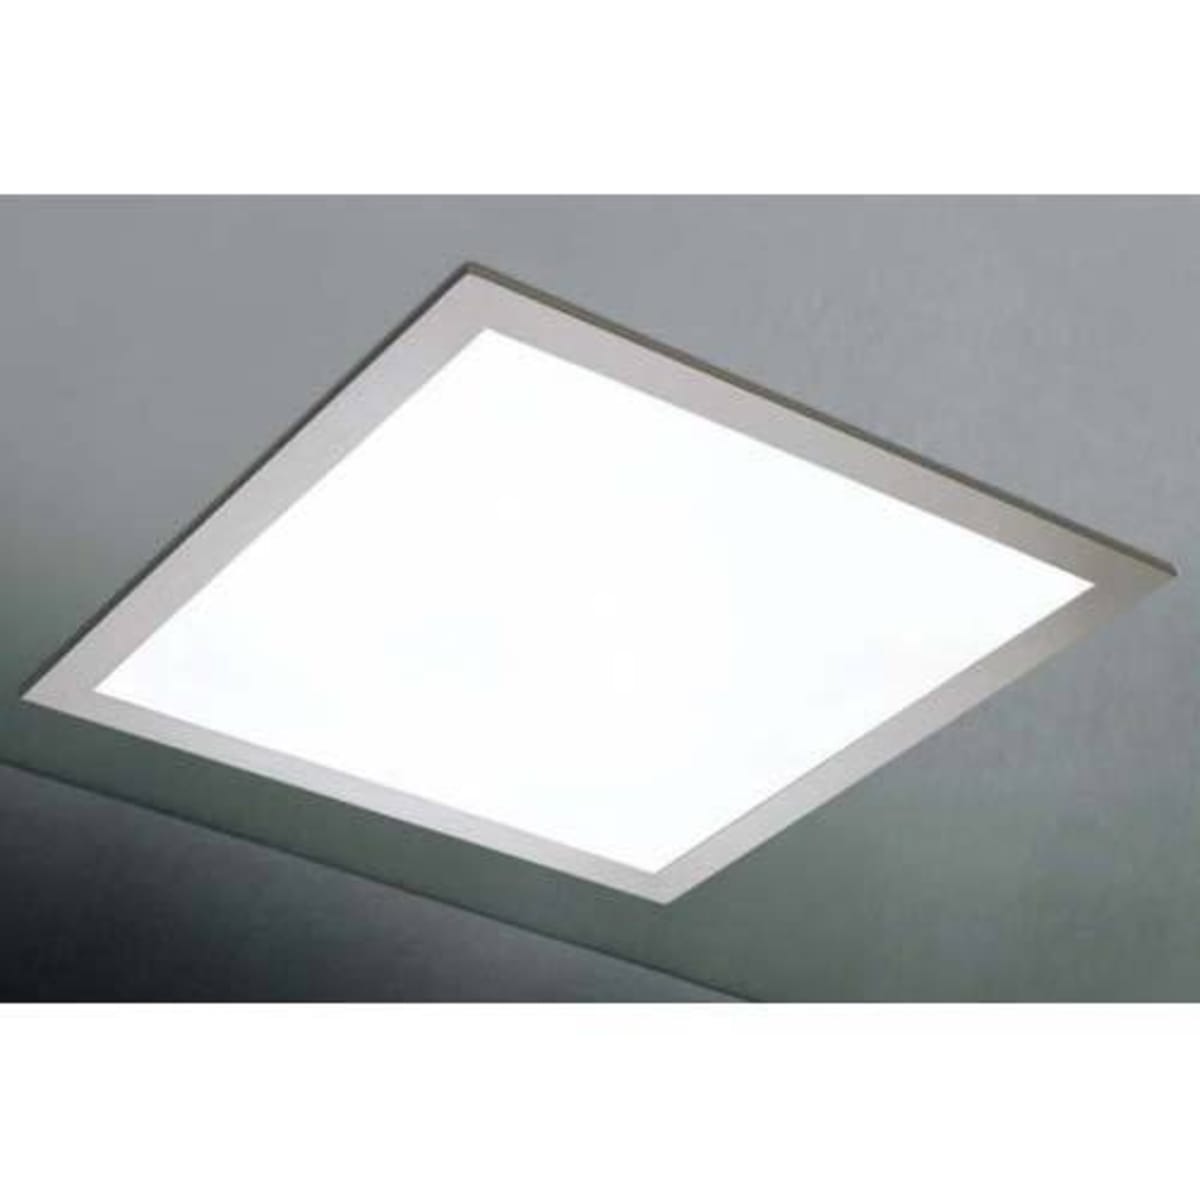 how to remove led ceiling light